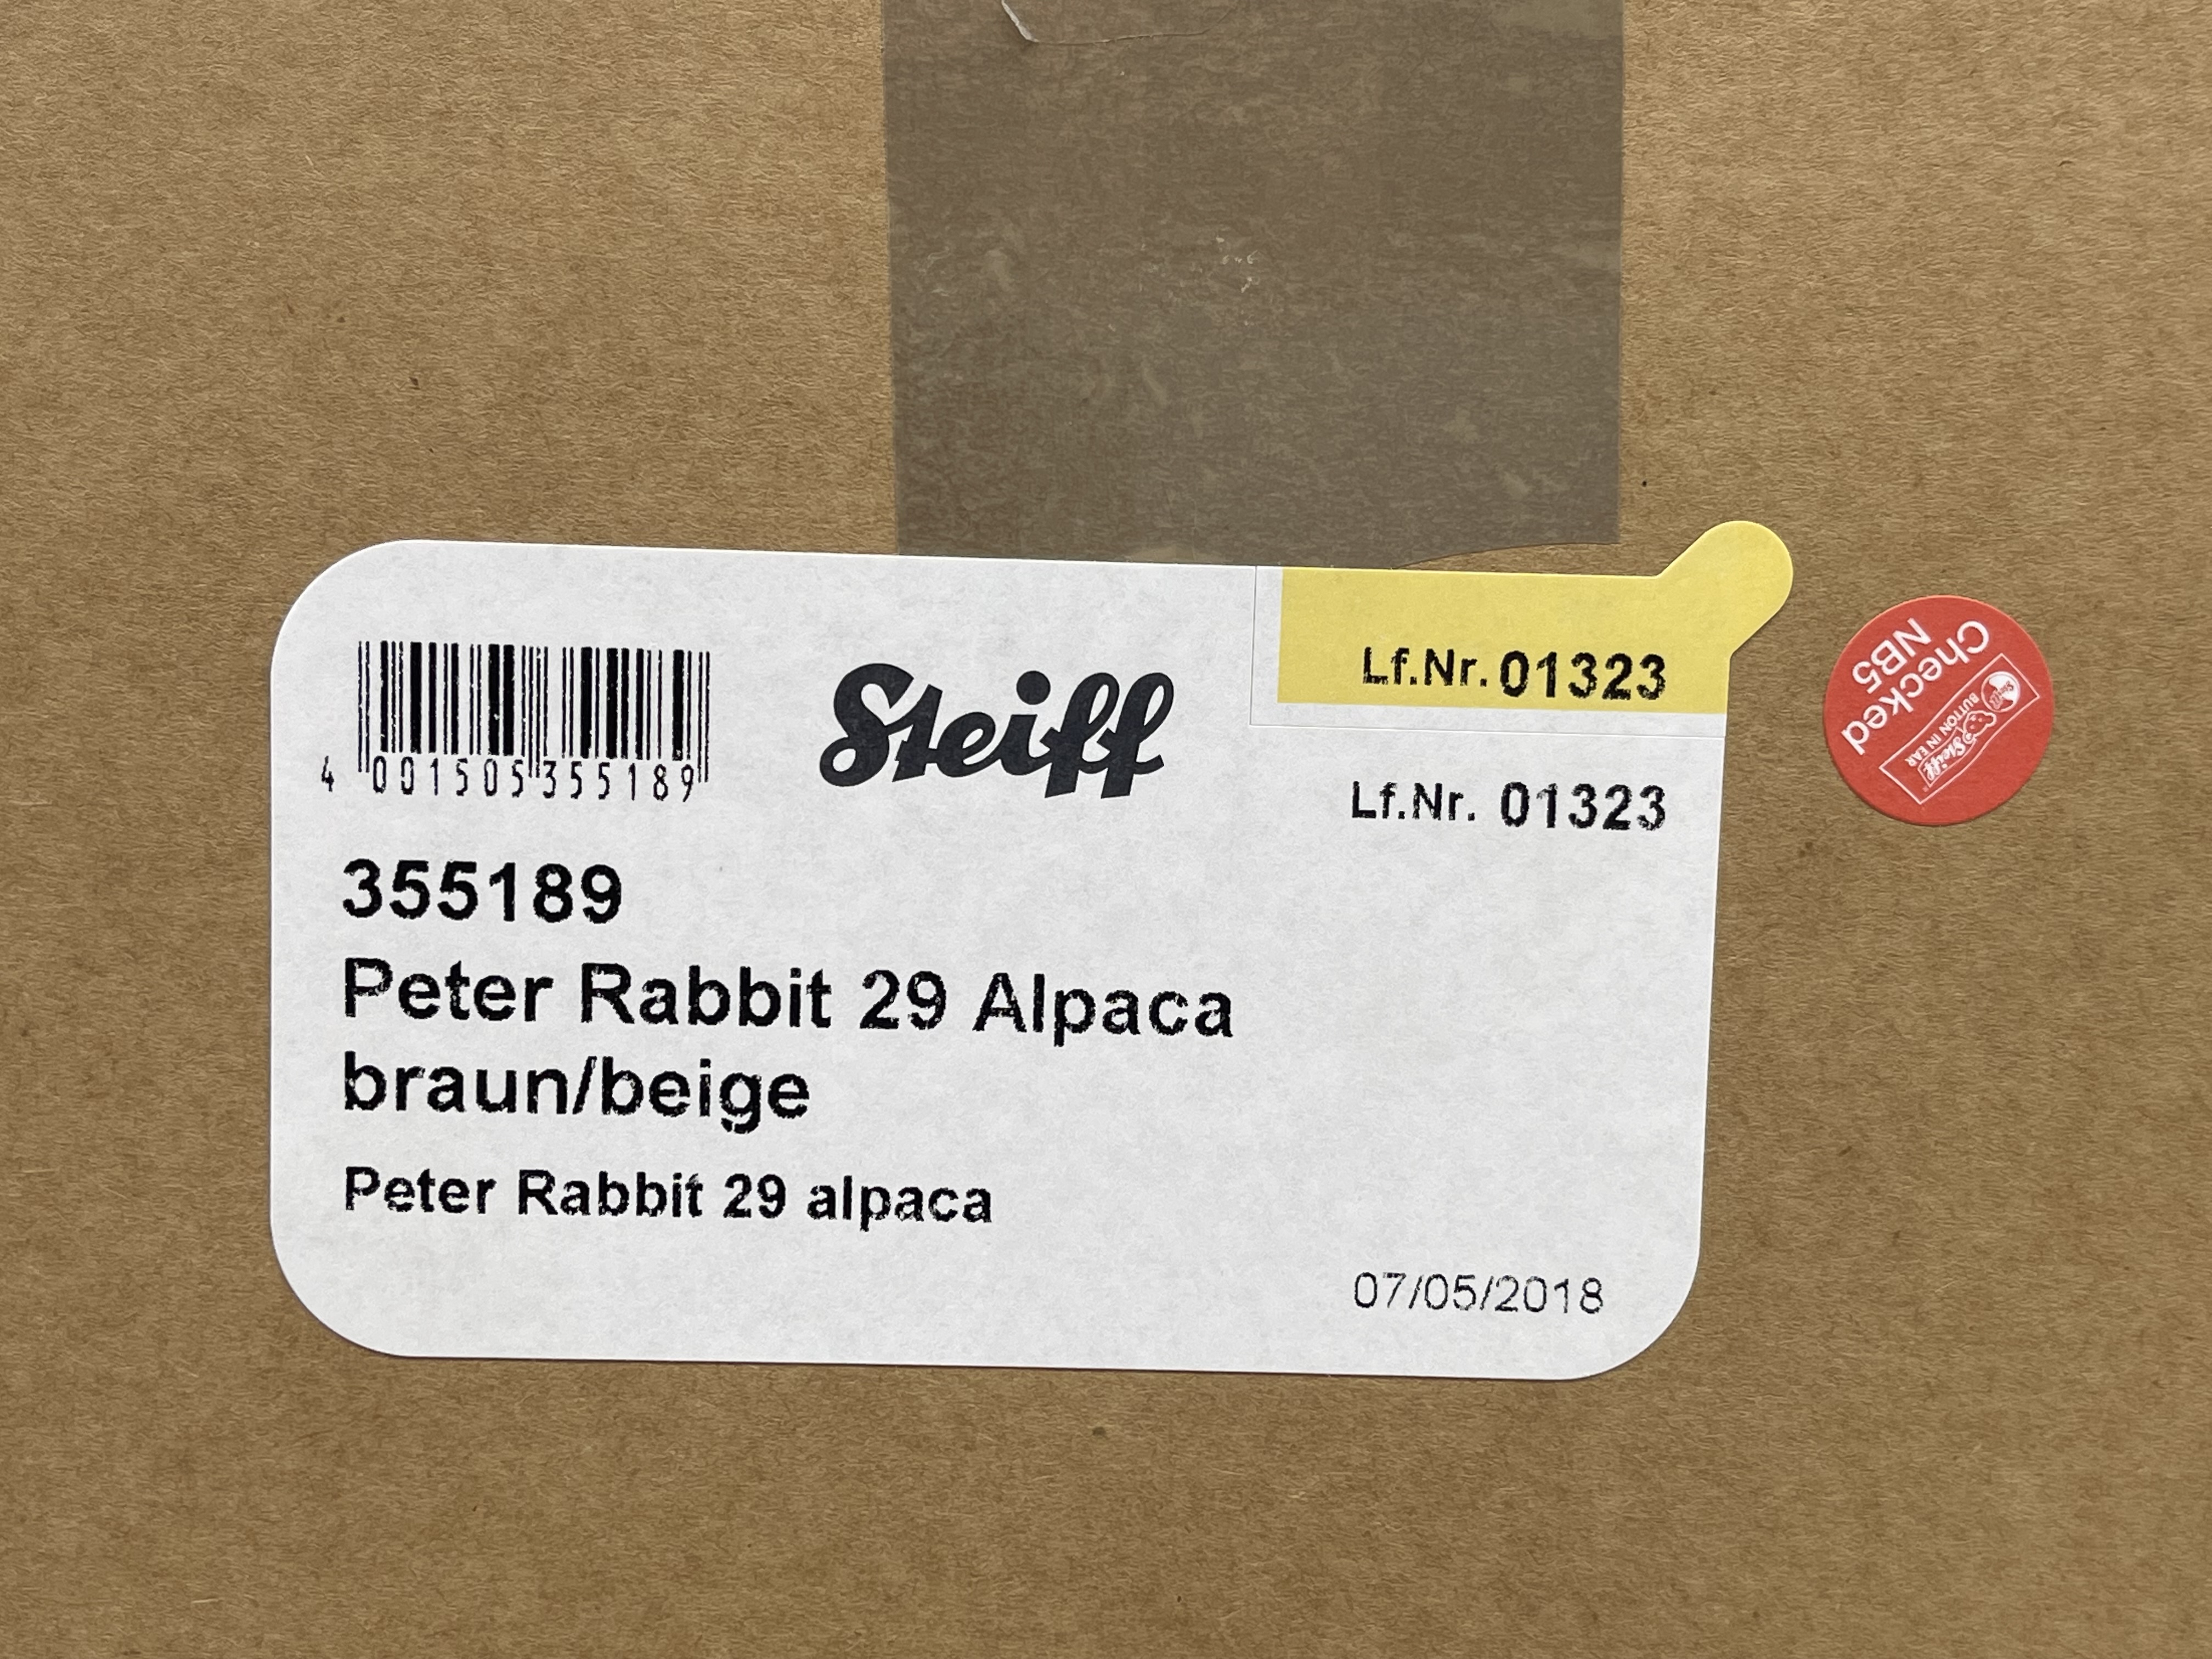 Boxed Steiff Peter Rabbit, Limited Edition, no 132 - Image 6 of 7